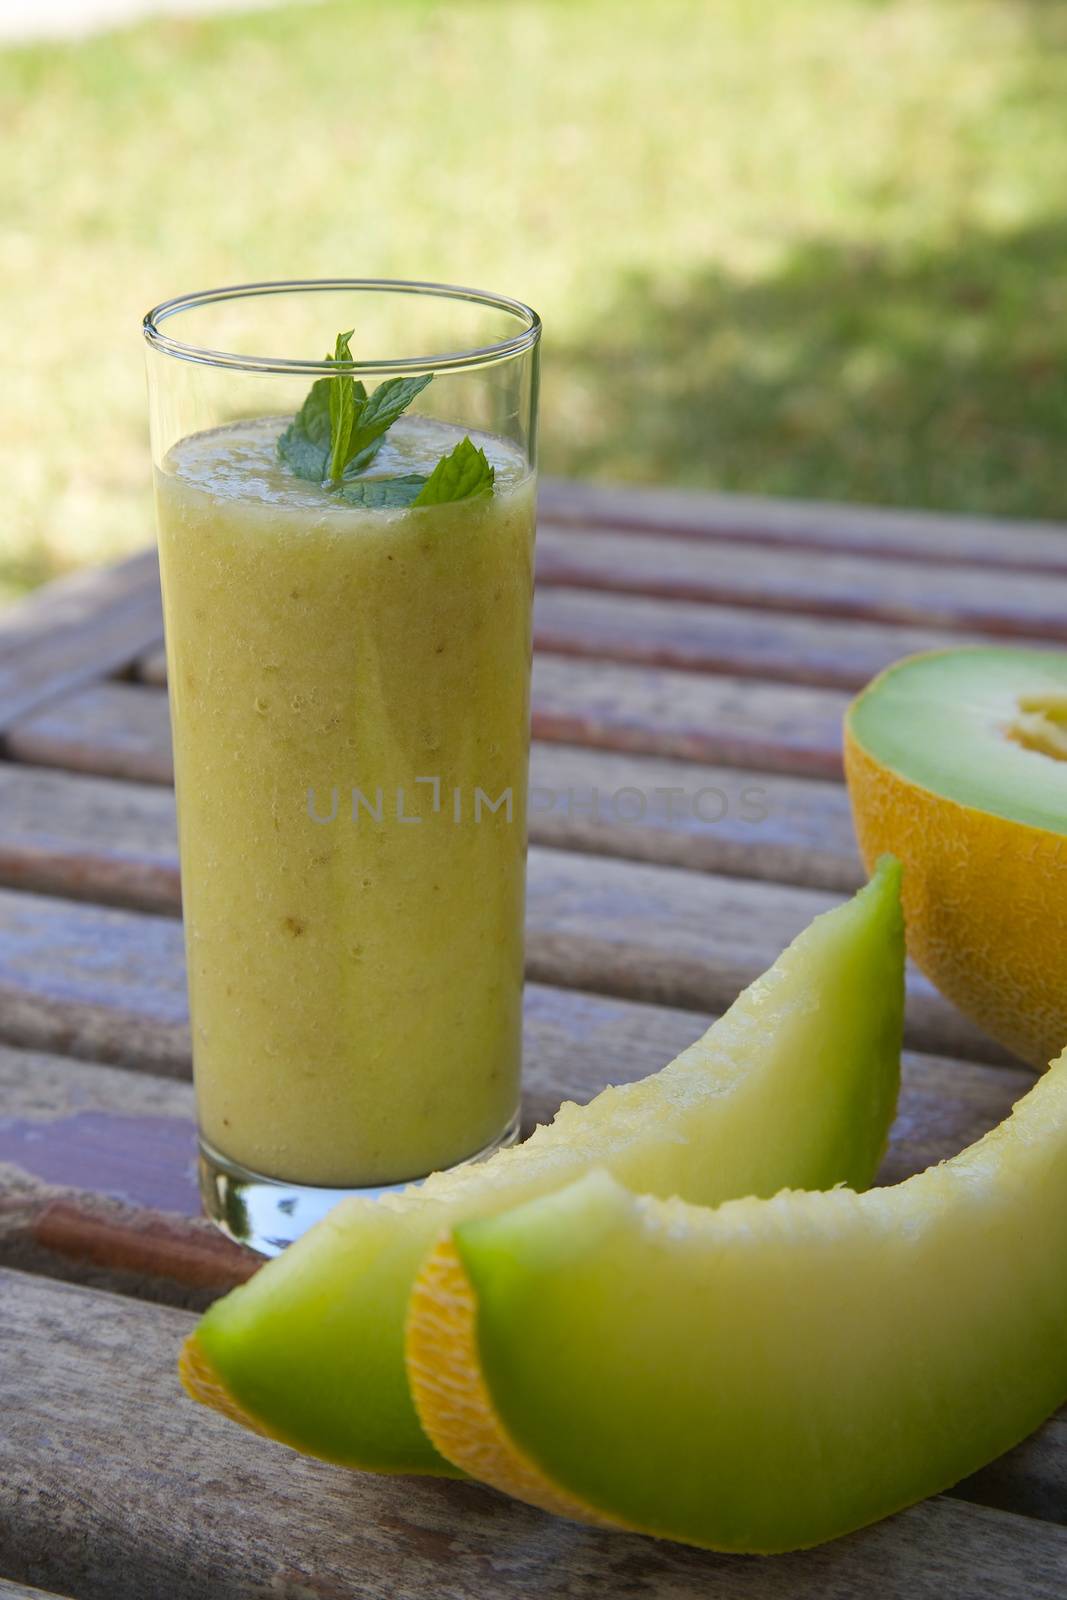 A glass of melon smoothie on an old wooden surface